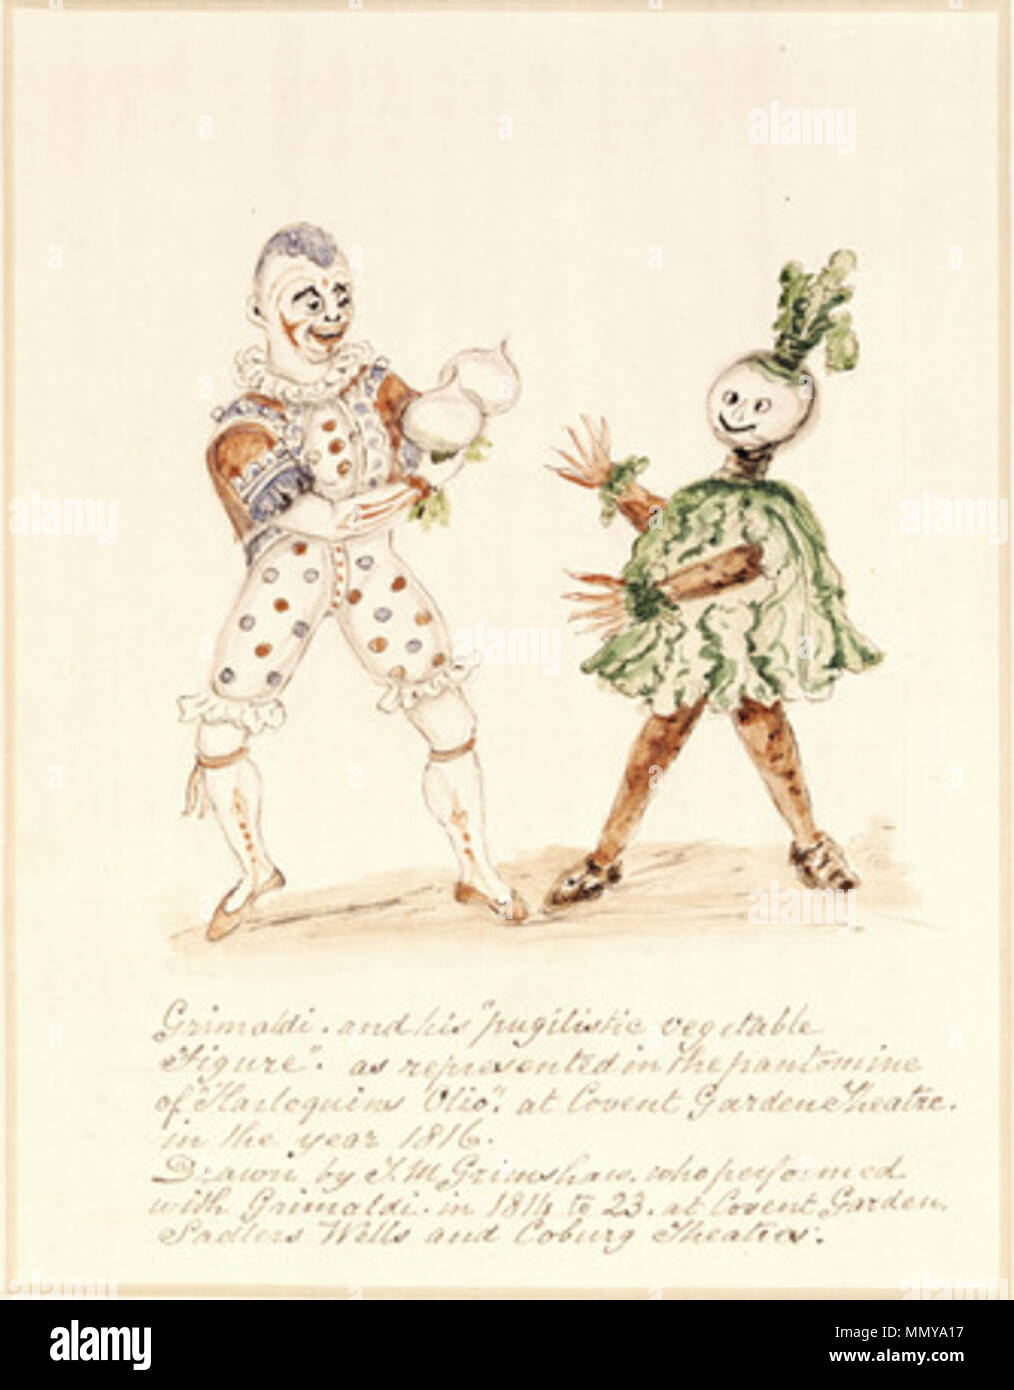 . English: Grimaldi in pose opposite an actor who was playing the part of a 'pugilistic vegetable'. Taken from the Christmas Pantomime 'Harlequin Olio' which was staged at the Covent Garden Theatre in 1816. This watercolour drawing is by T M Grimshaw, who performed with Grimaldi from 1814 to 1823 at the Covent Garden, Sadlers Wells and Coburg theatres.  . circa 1816. T.M.Grimshaw Grimaldi and Vegetable Stock Photo